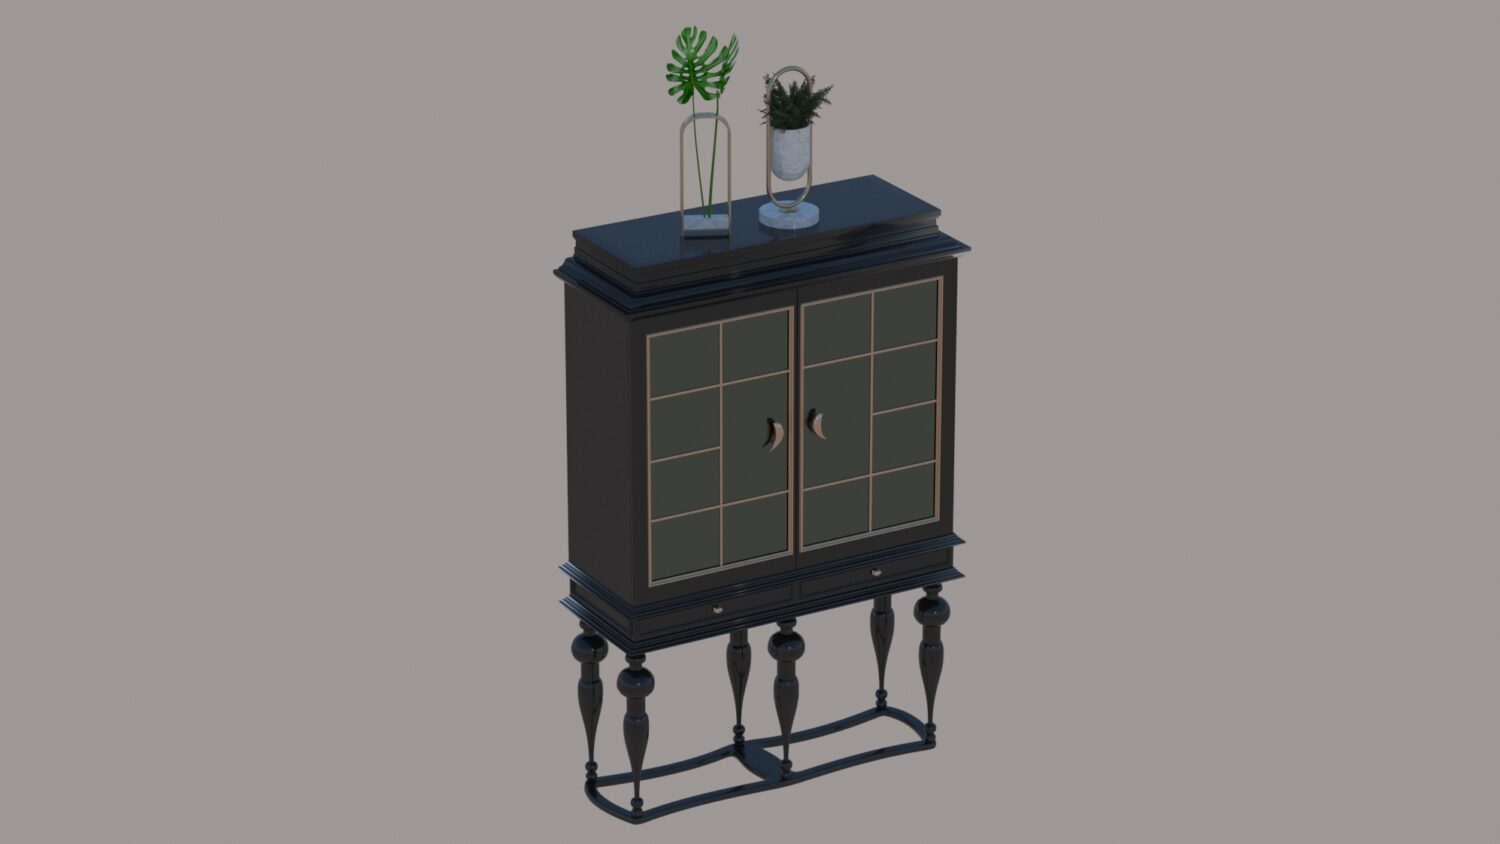 10030. Download Free Display Cabinets Model by Hoang Tuan Anh